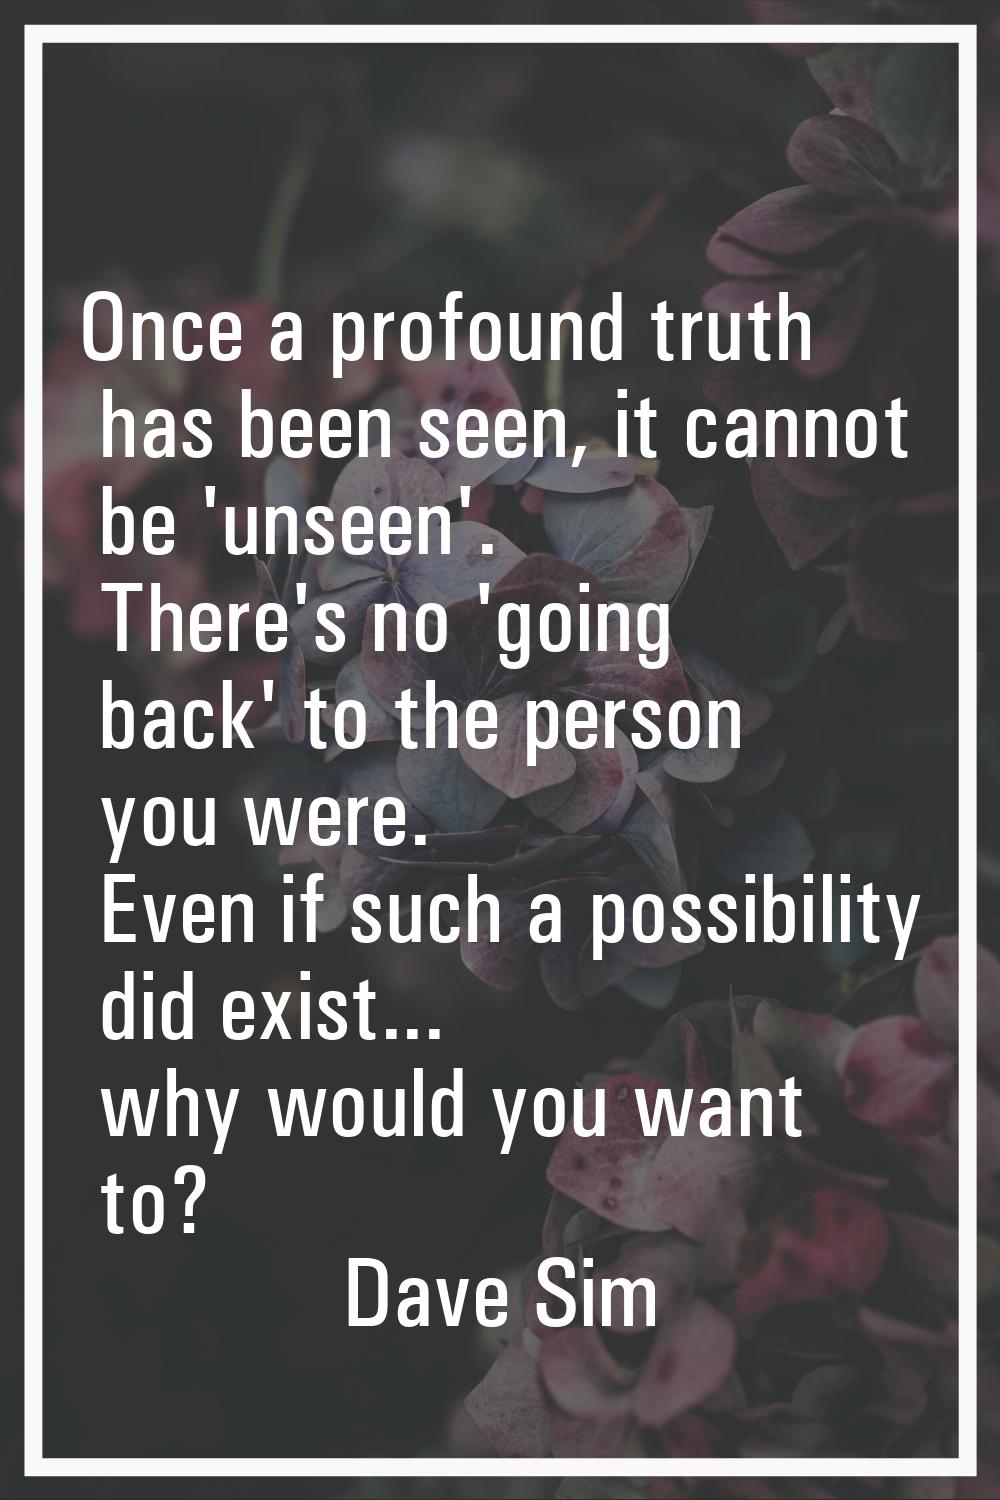 Once a profound truth has been seen, it cannot be 'unseen'. There's no 'going back' to the person y